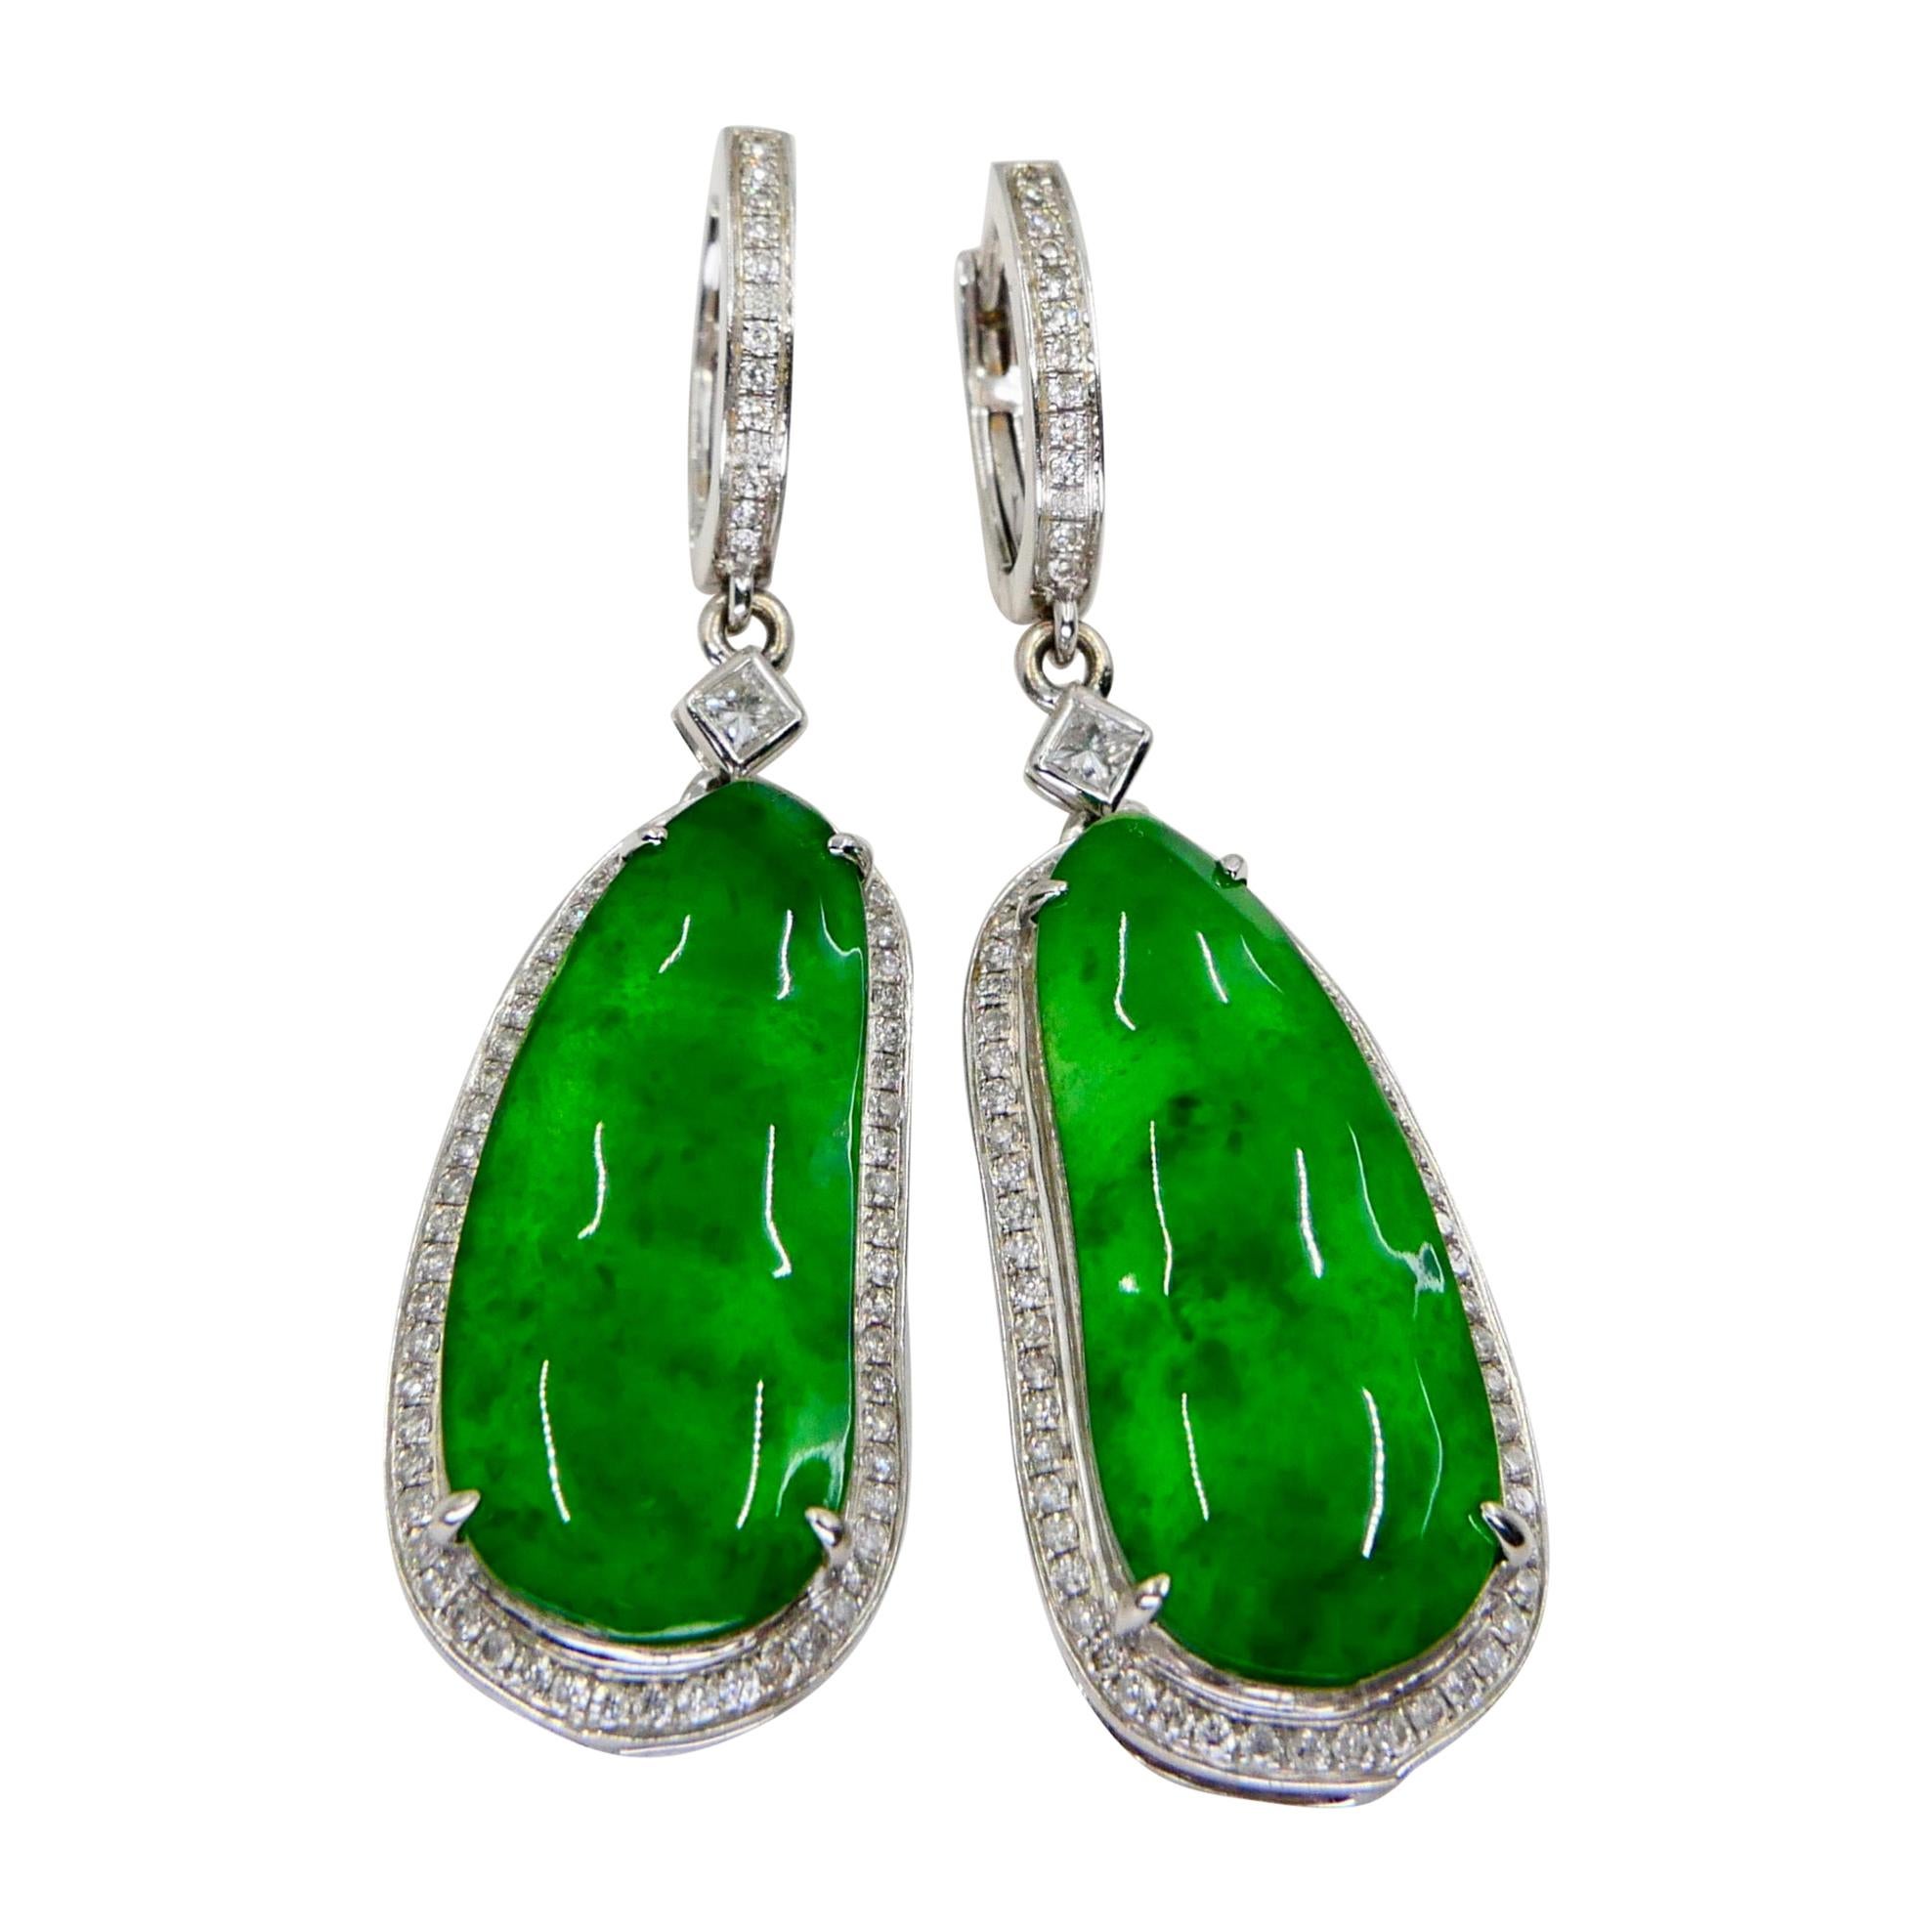 Certified Natural Type A Icy Jade Peapod Diamond Earrings, Glowing Apple Green For Sale